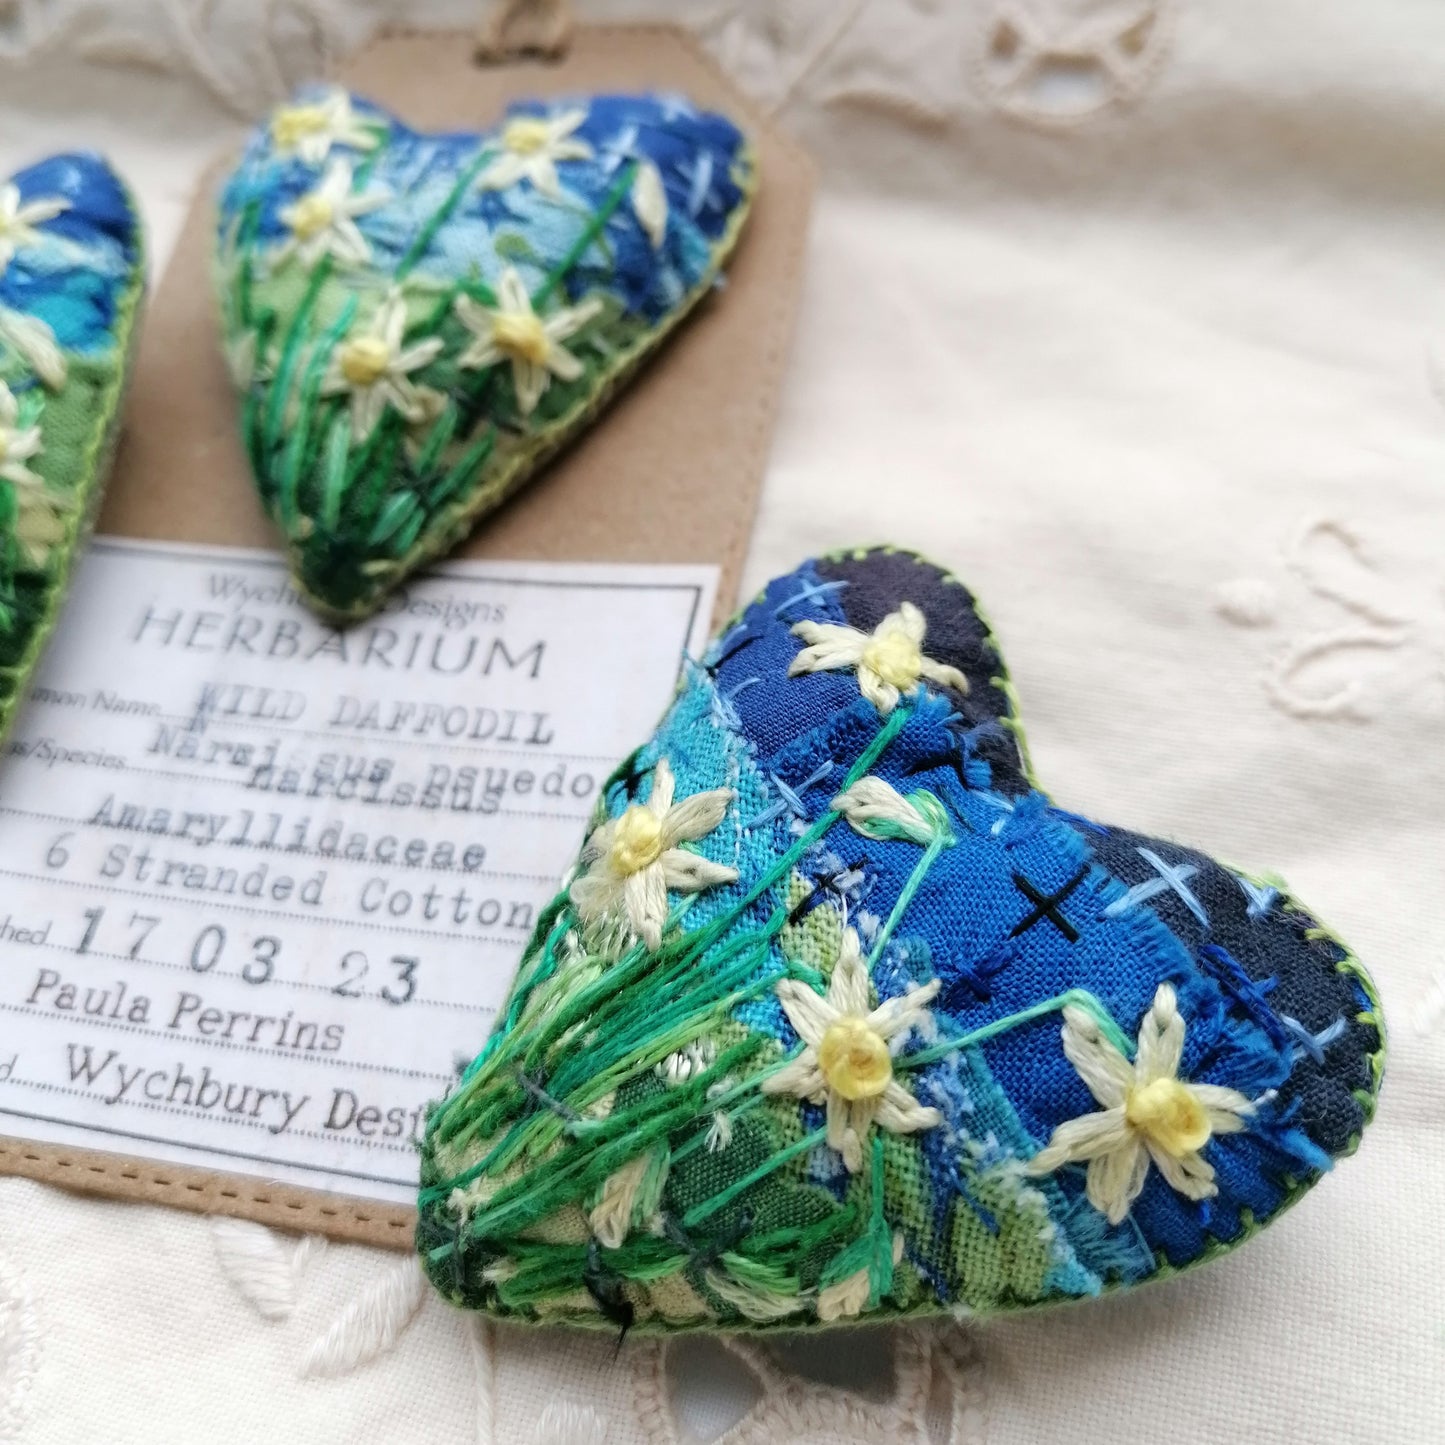 Stitched DAFFODIL Heart Brooches